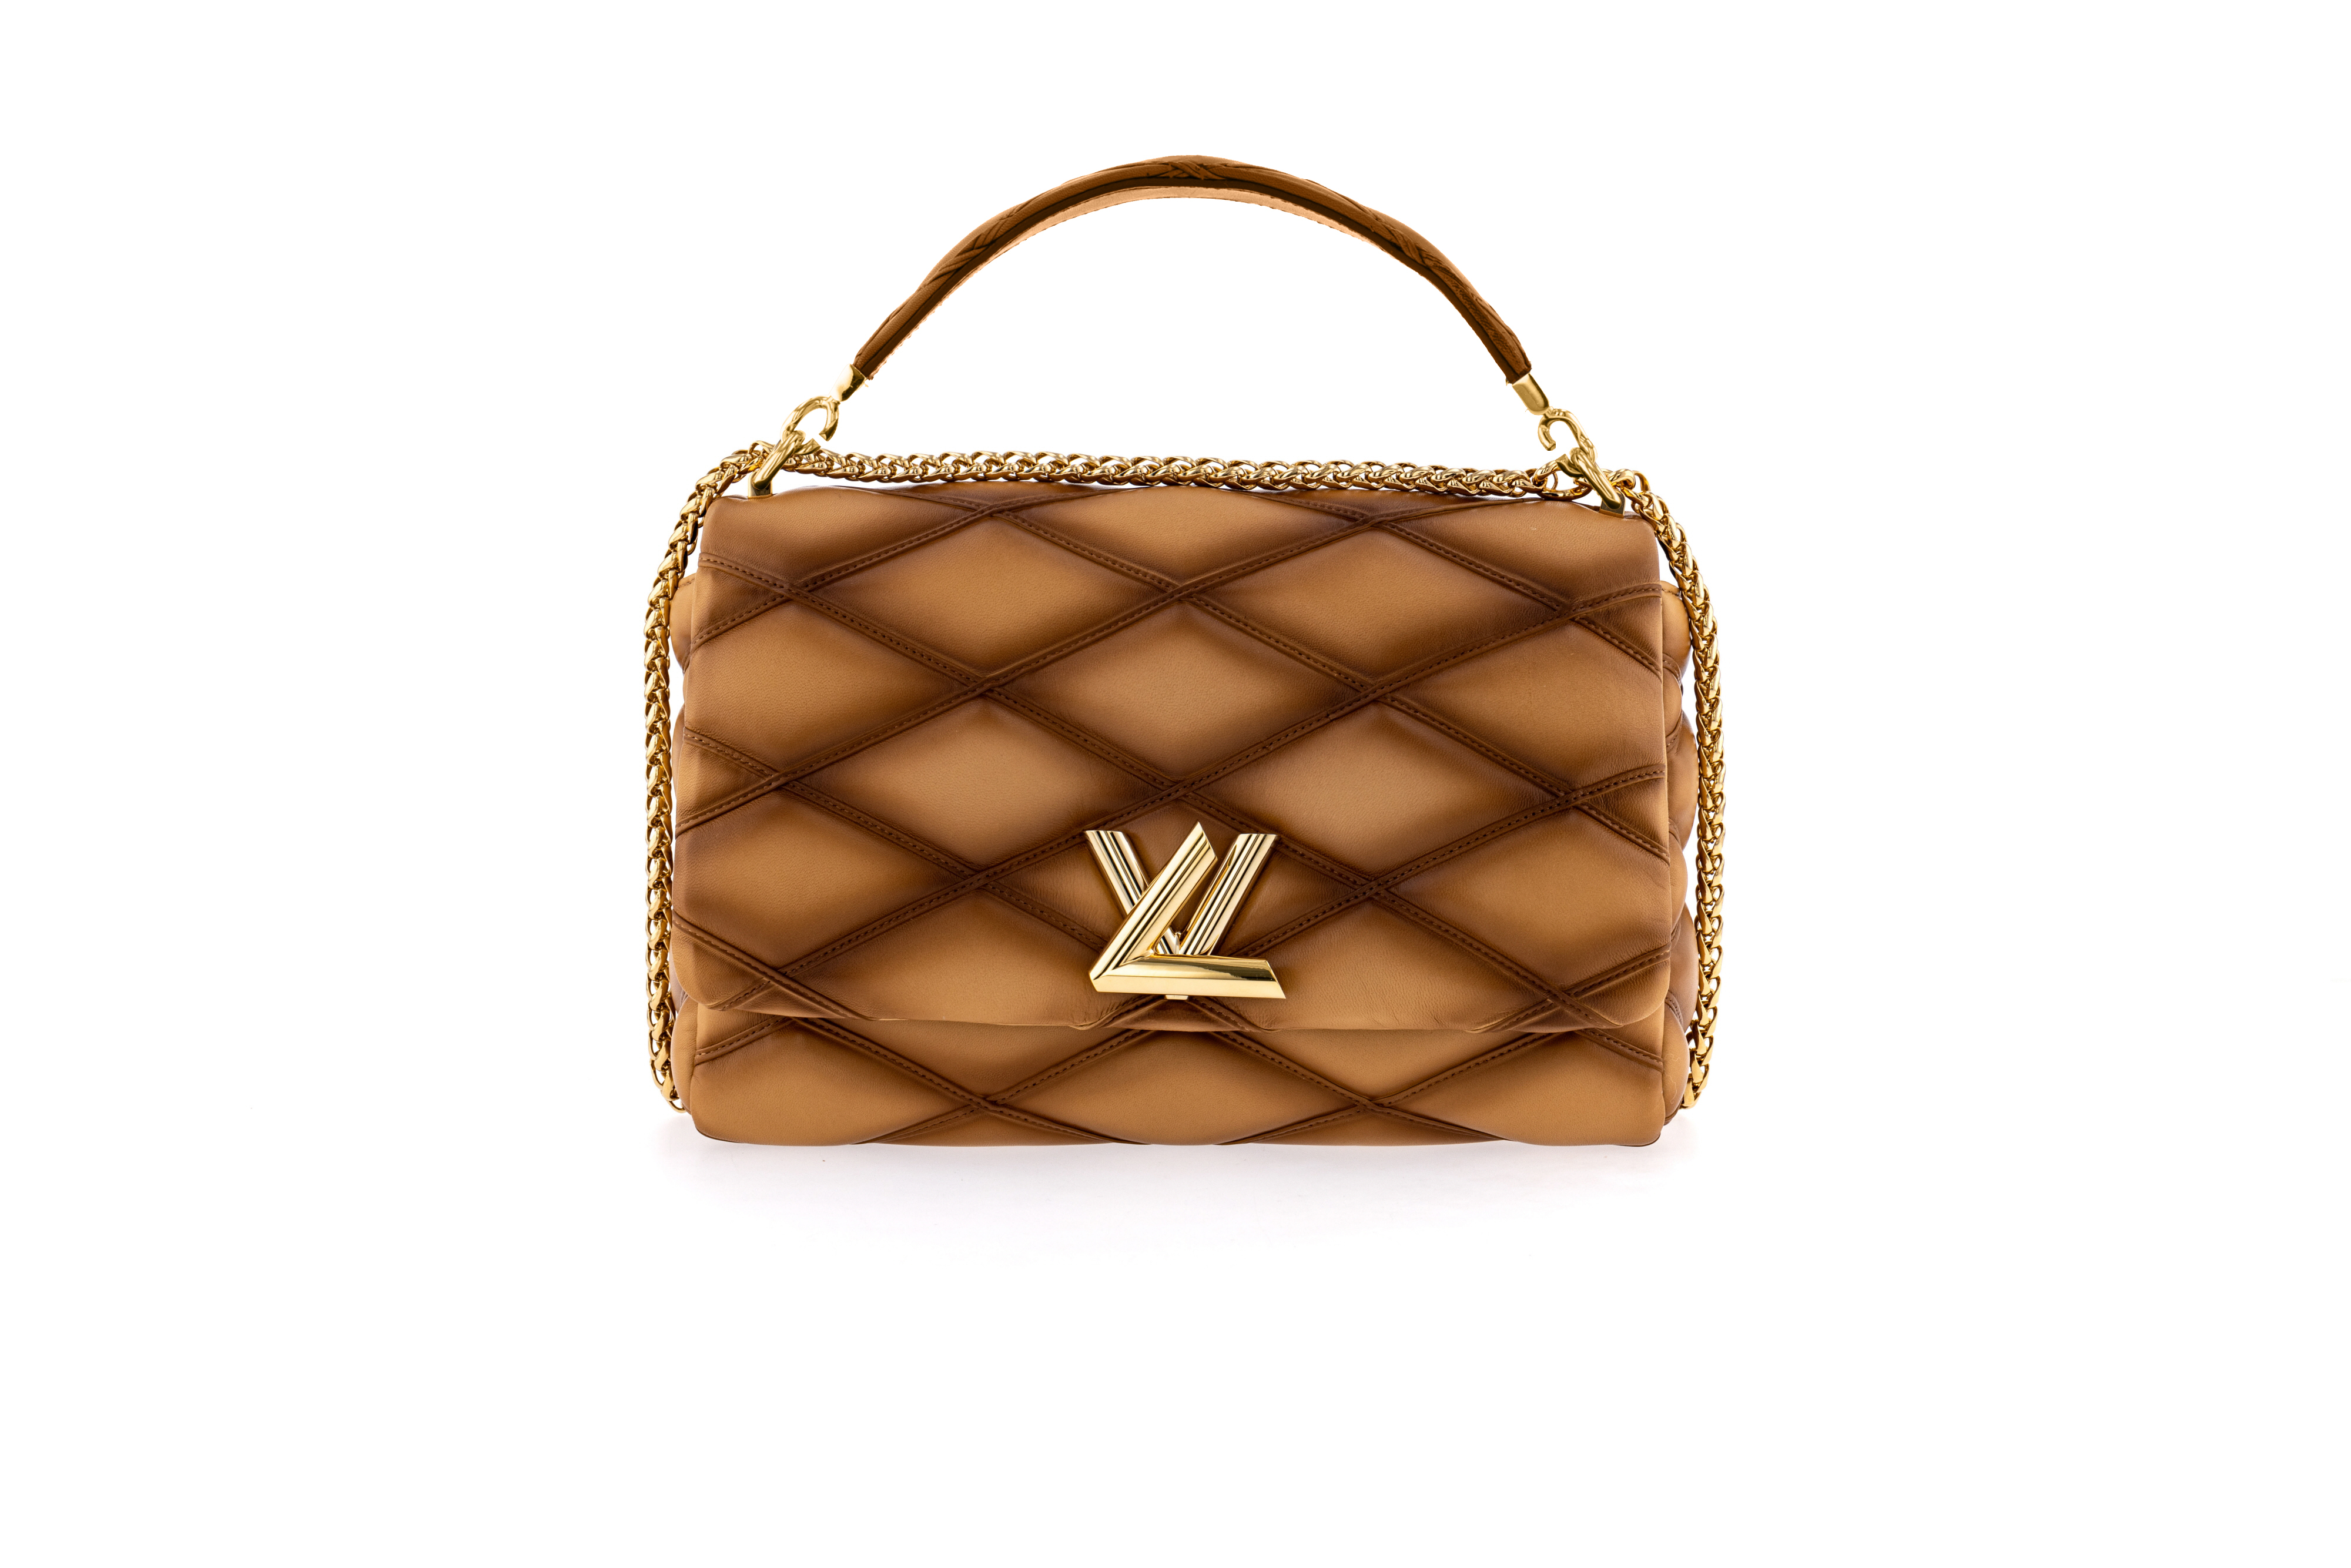 Louis Vuitton Introduces New Colorways of the Go-14 Bag